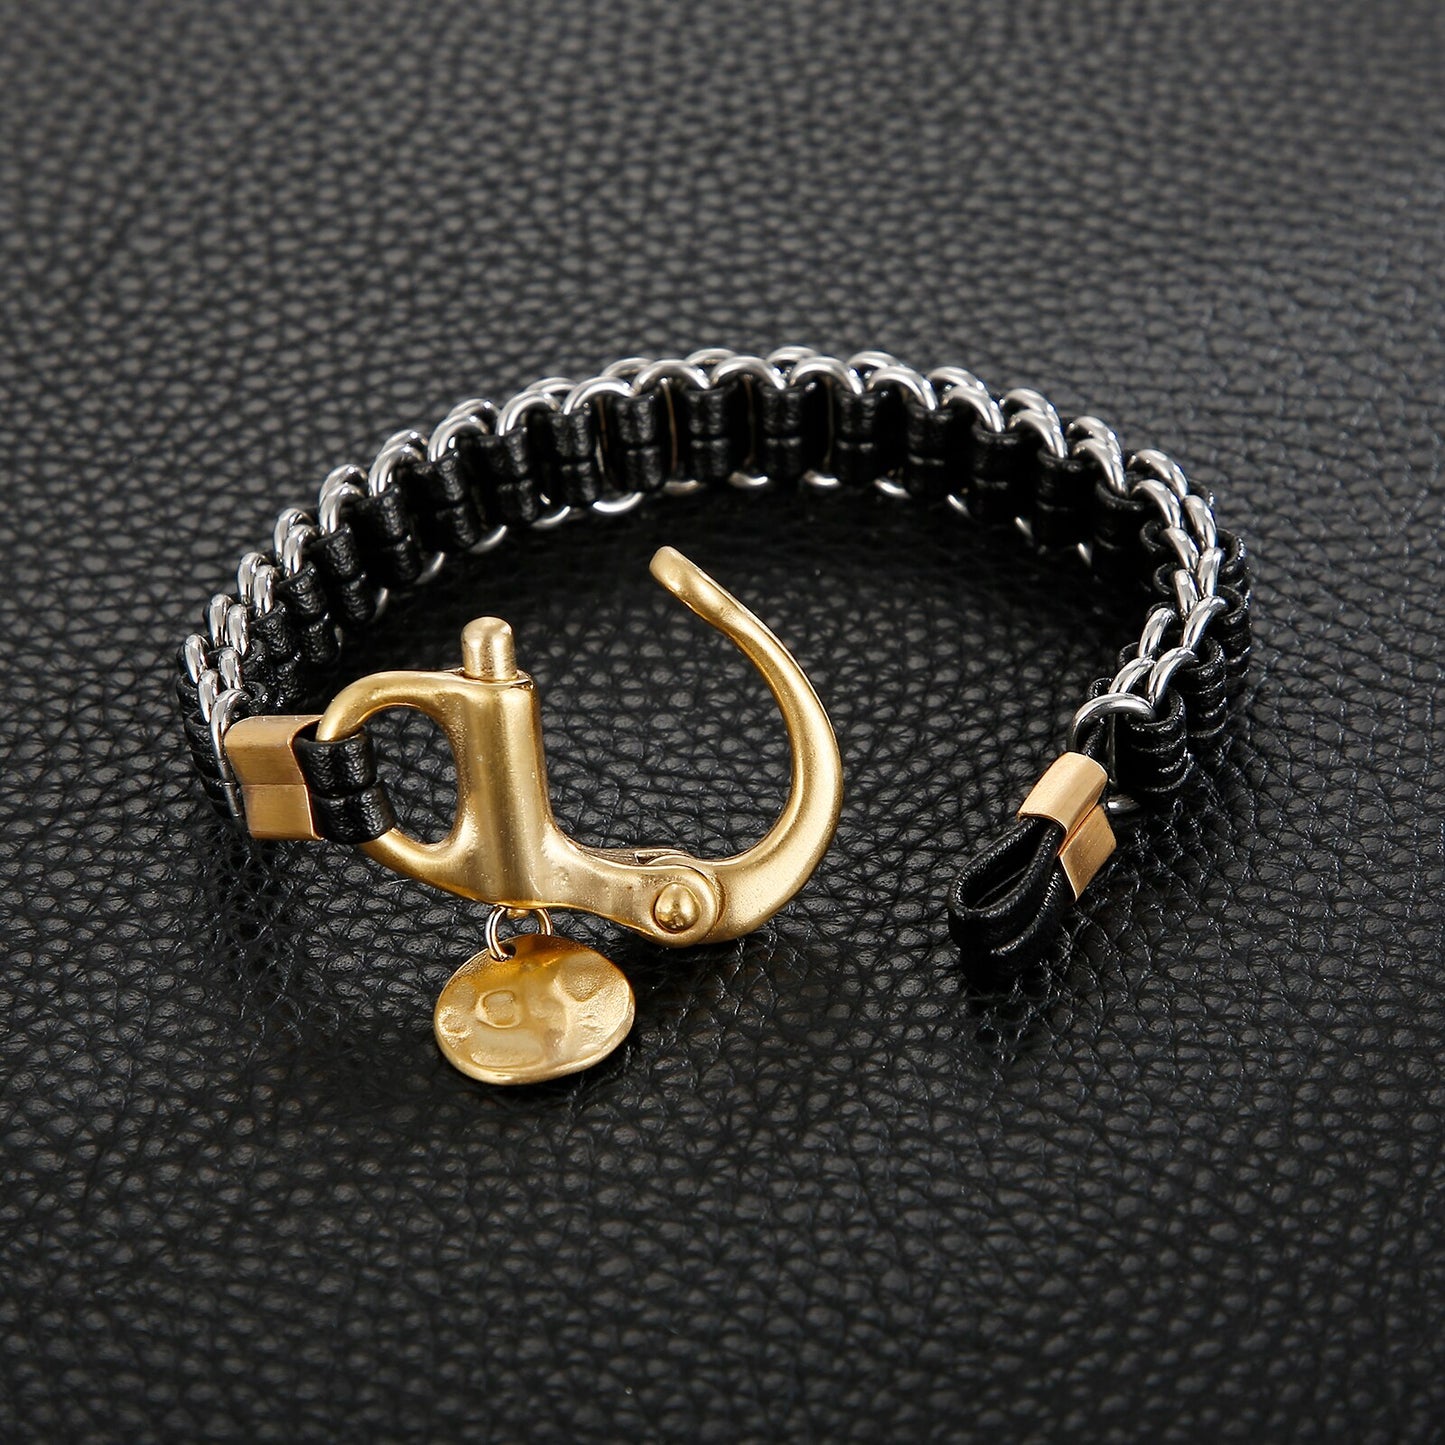 Punk Rock Big Clasp Men Leather Bracelet Round Charm Rope with Stainless Steel Classic Bangle Jewelry